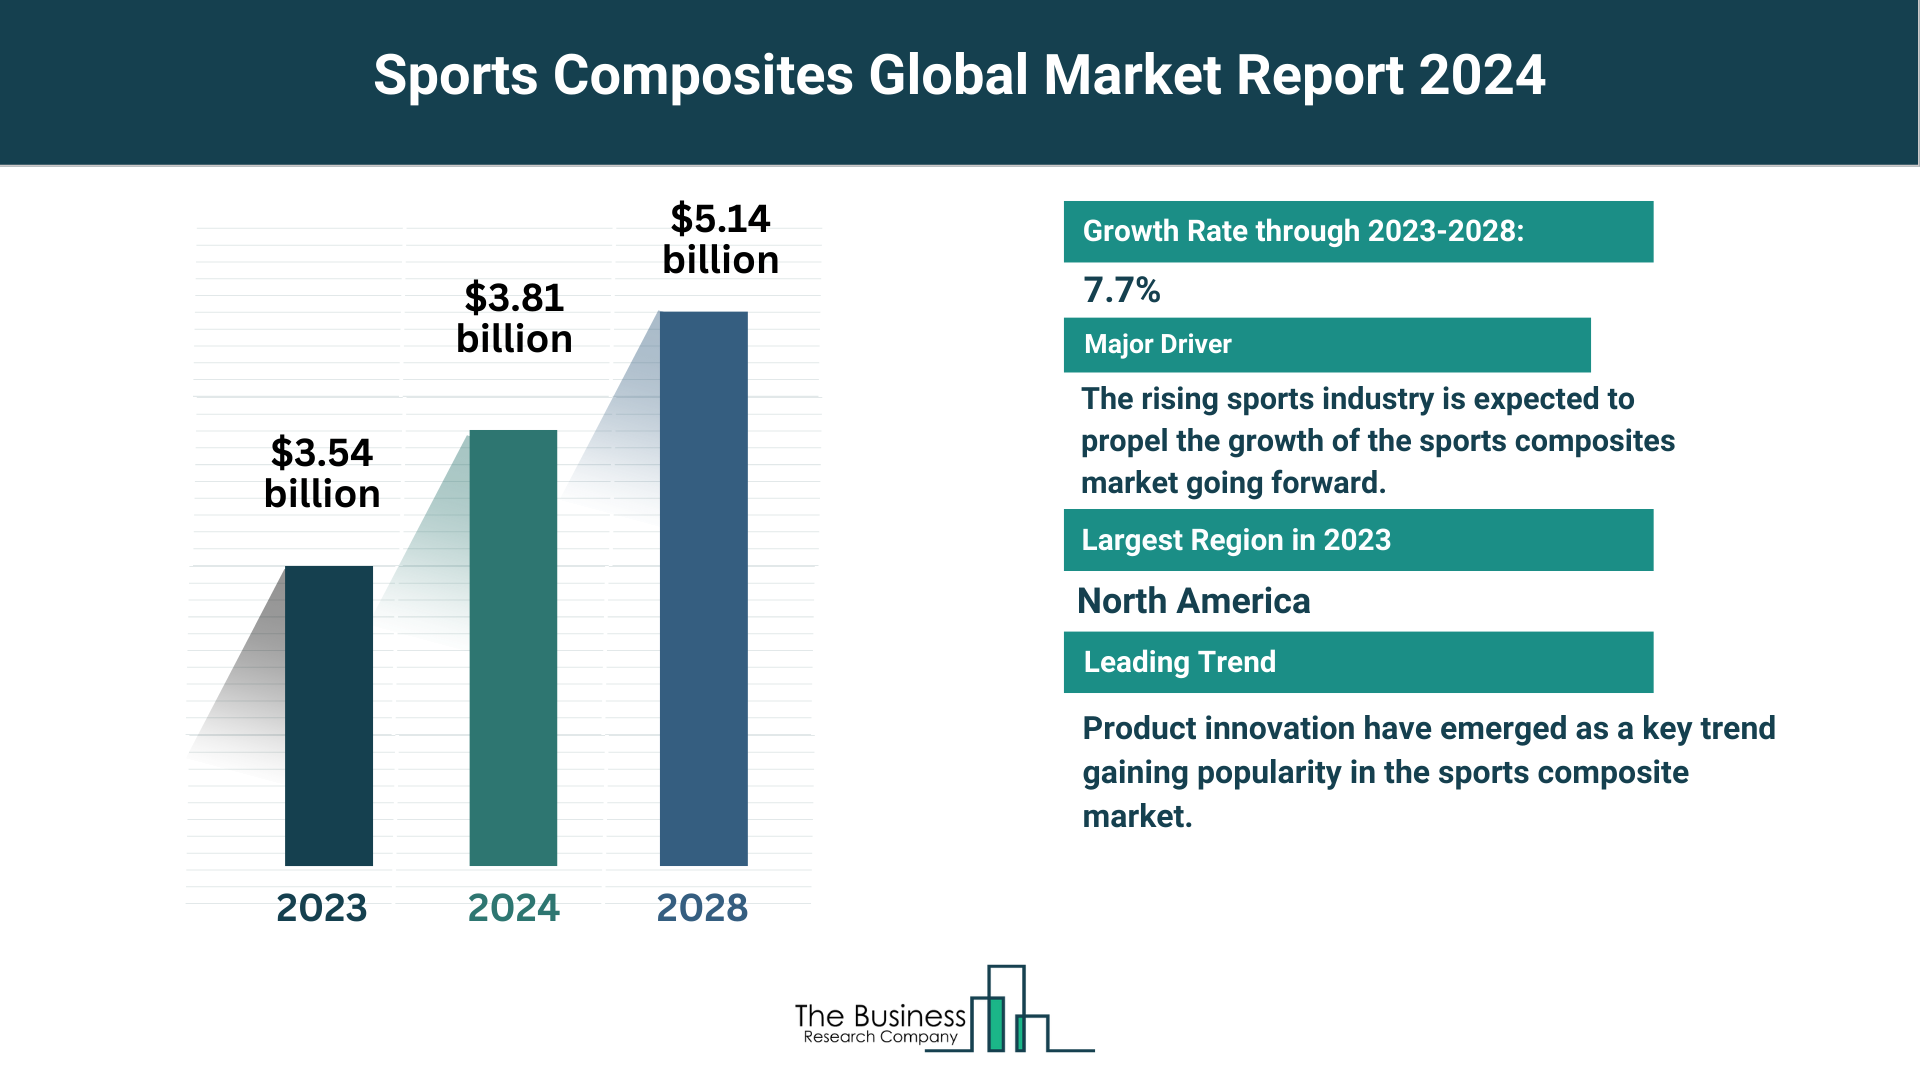 Global Sports Composites Market Analysis: Size, Drivers, Trends, Opportunities And Strategies